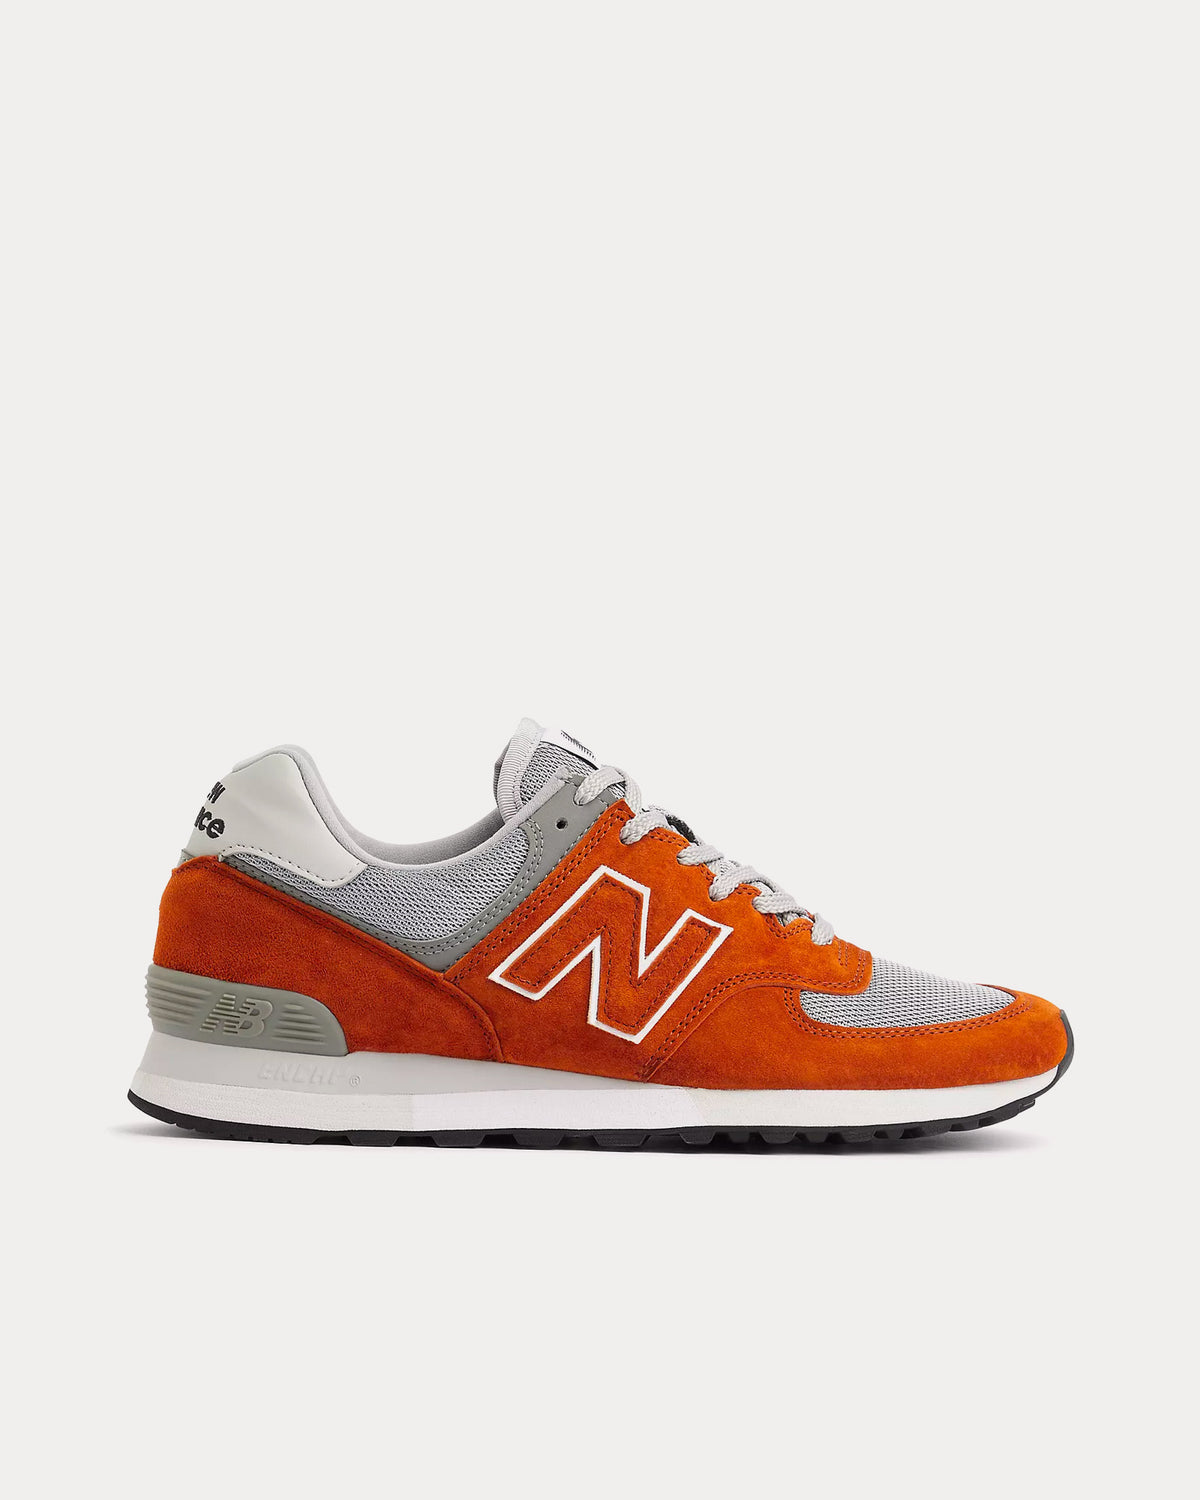 New Balance - MADE in UK 576 Orange / Alloy / Gray Violet Low Top Sneakers